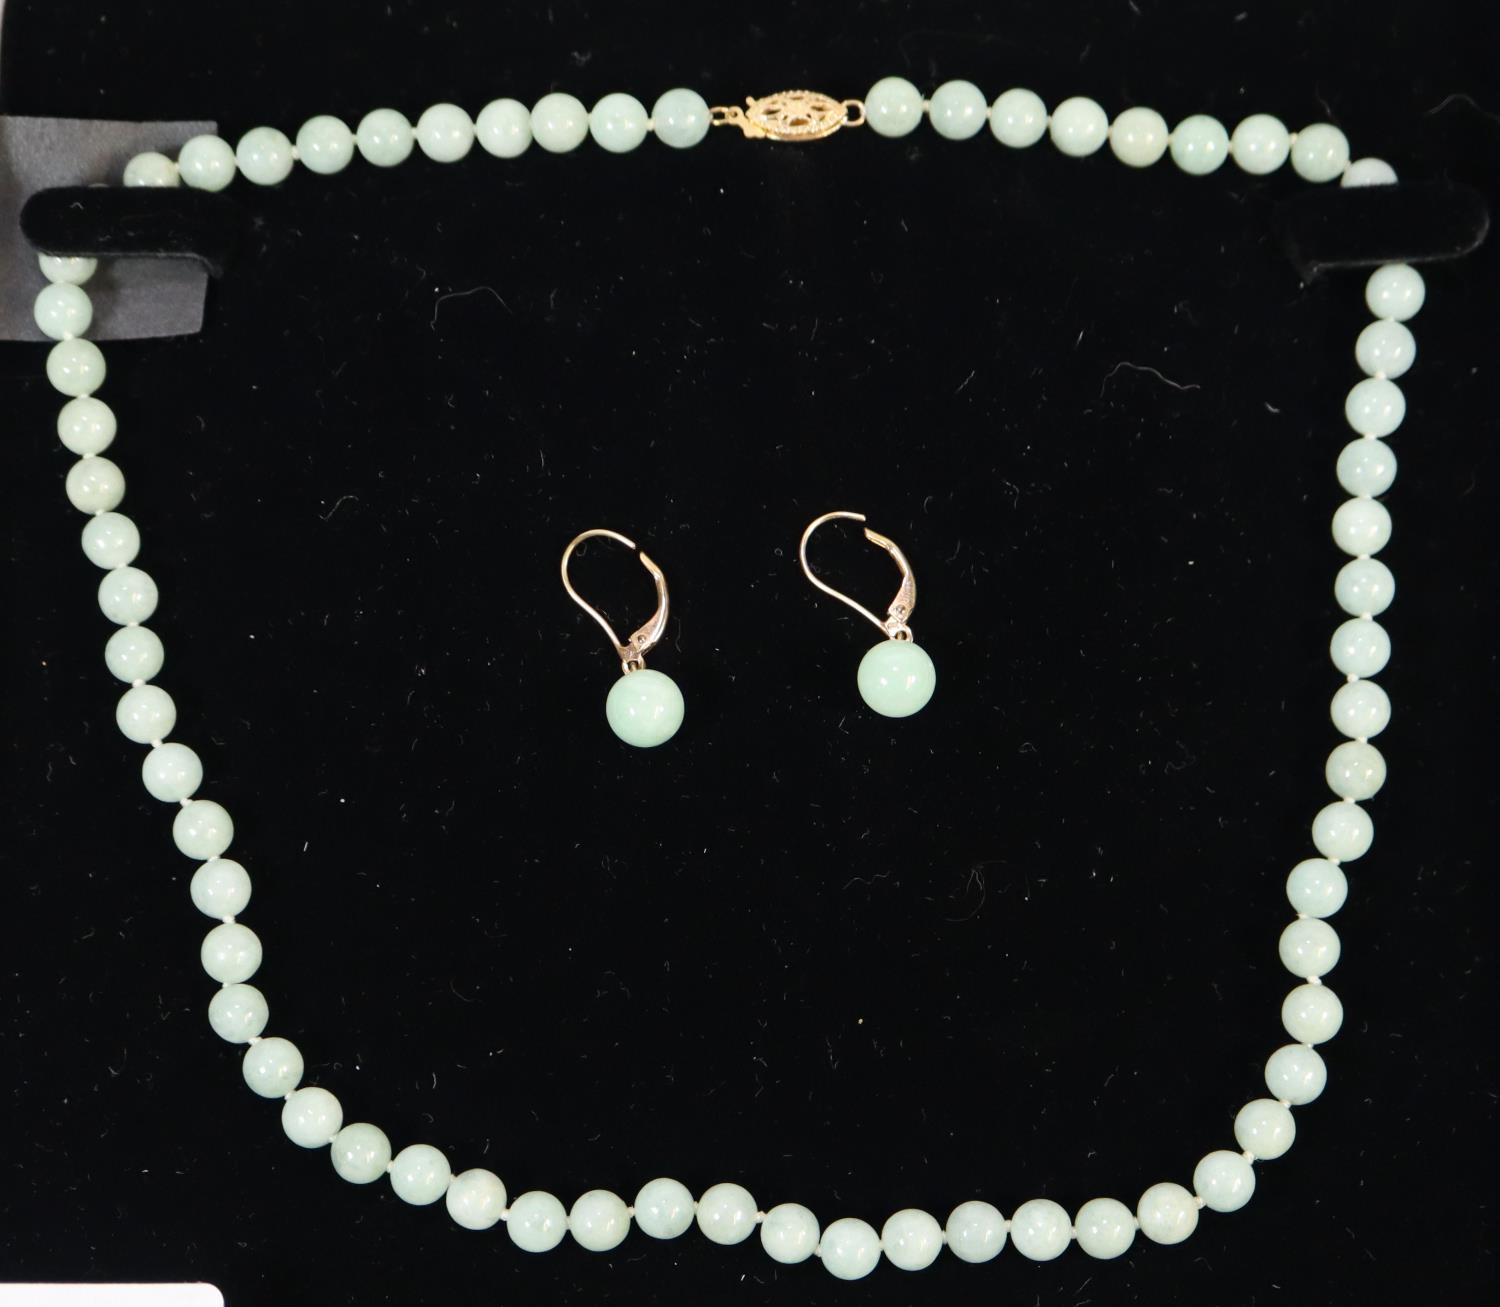 An oriental design necklace of green graduated hardstone beads with a pair of matching earrings.